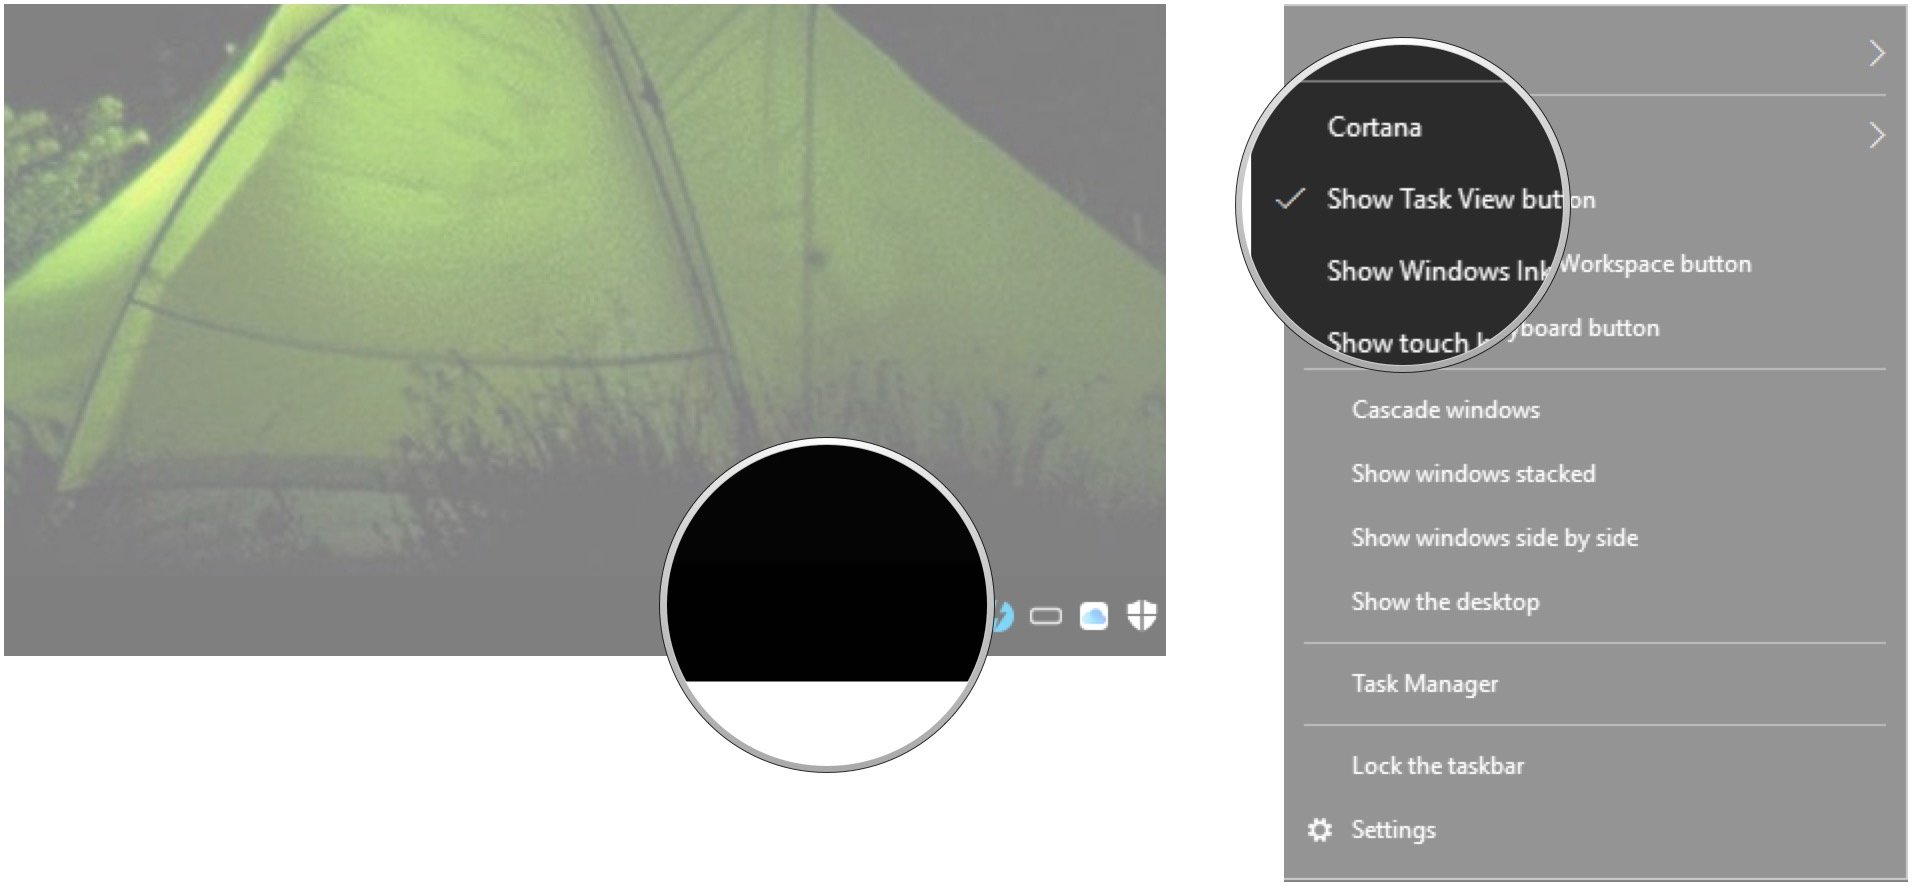 Right-click a blank spot on your taskbar. Click Show Task View button.